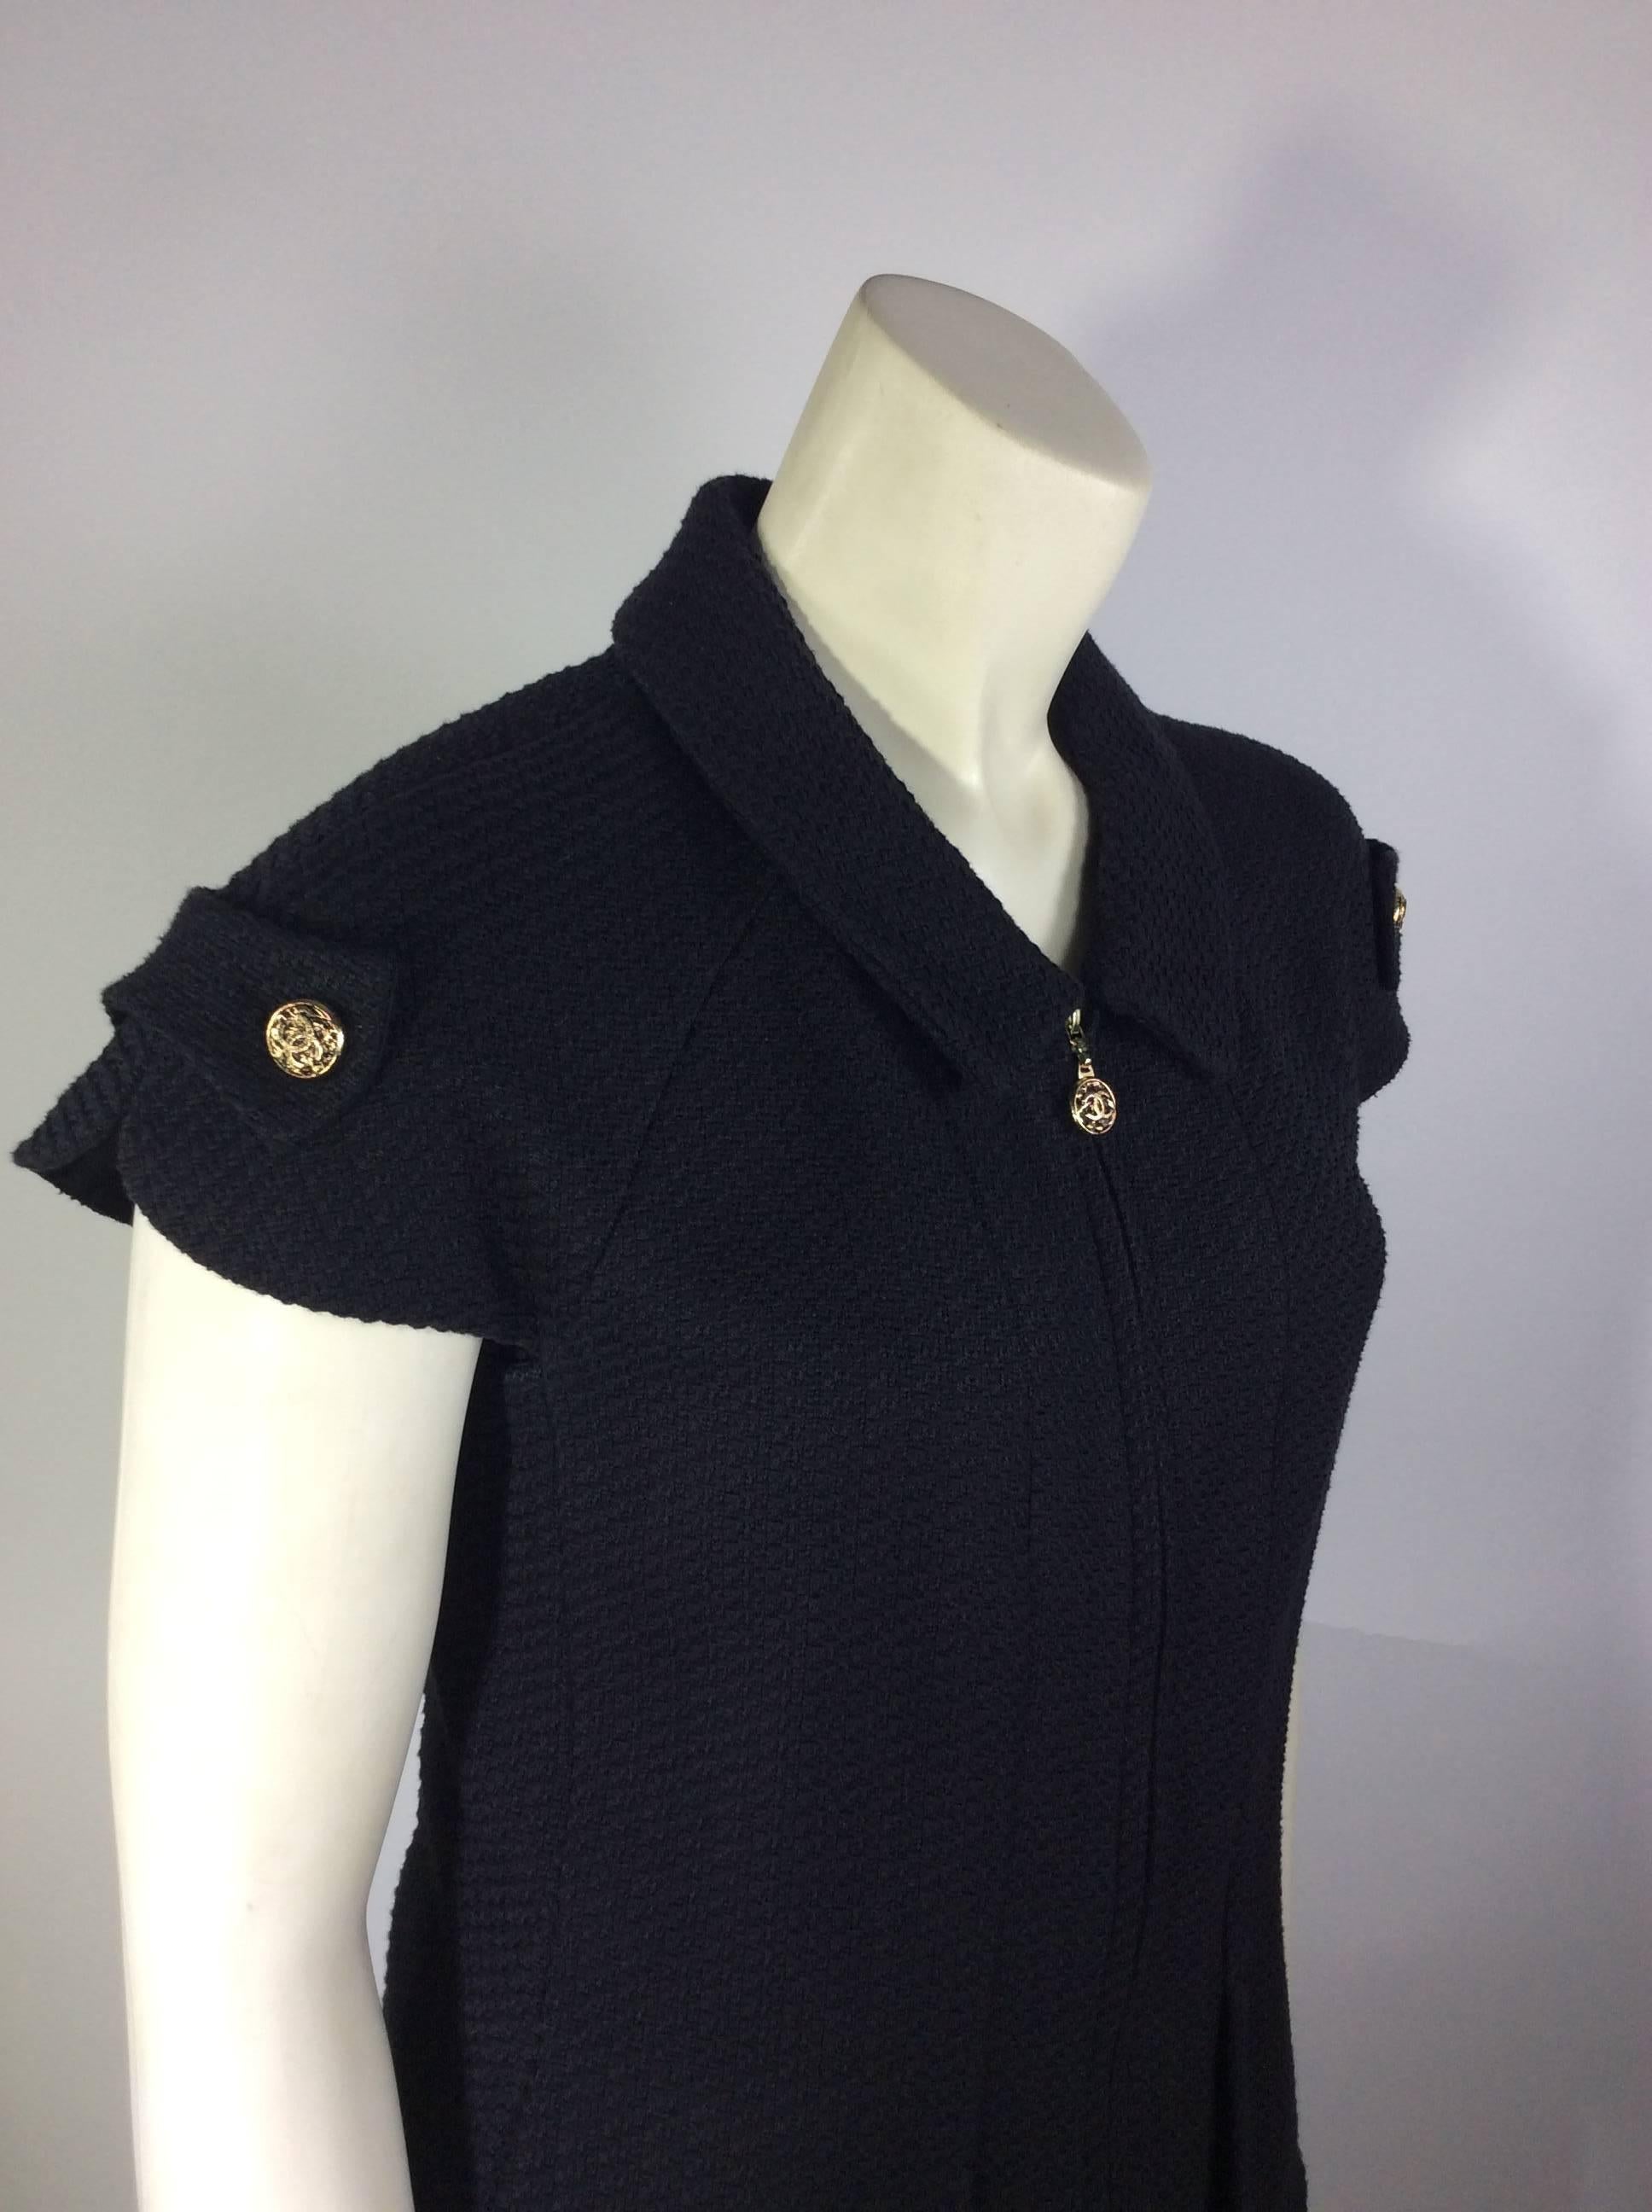 Chanel 2007 Black Cotton Suit with Gold Buttons For Sale 1